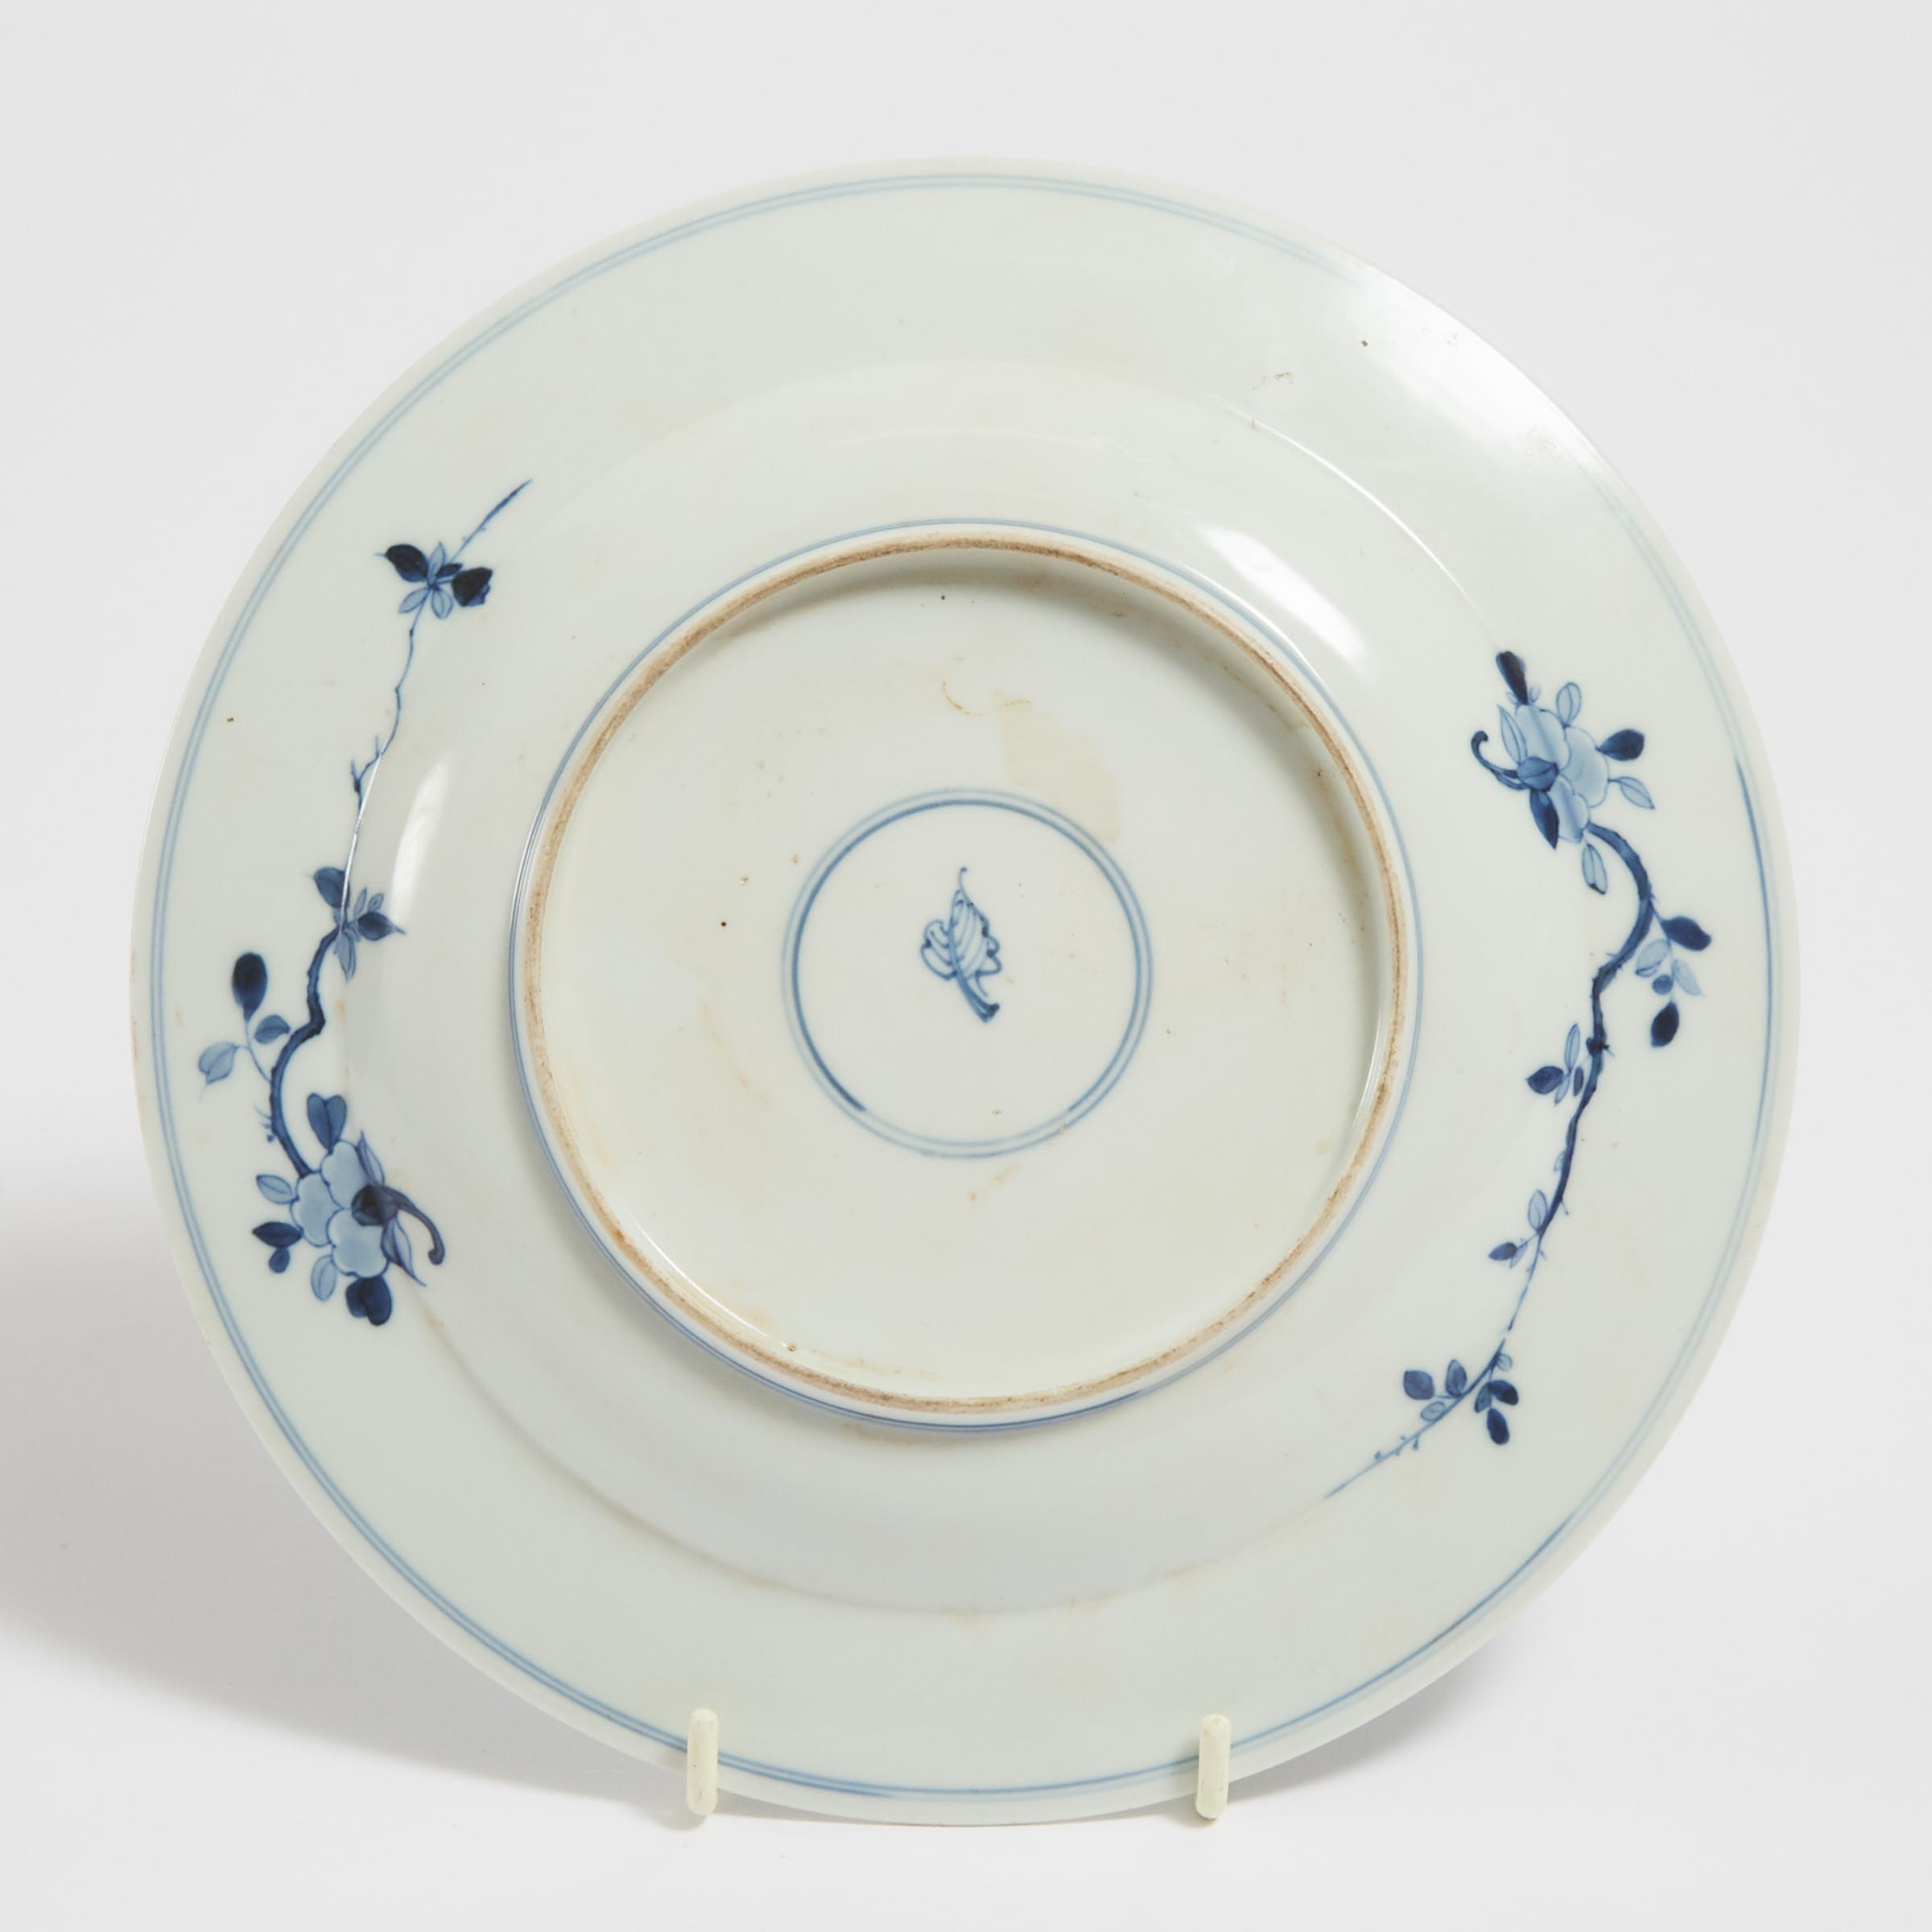 A Blue and White 'Figural' Plate, Kangxi Period (1662-1722)